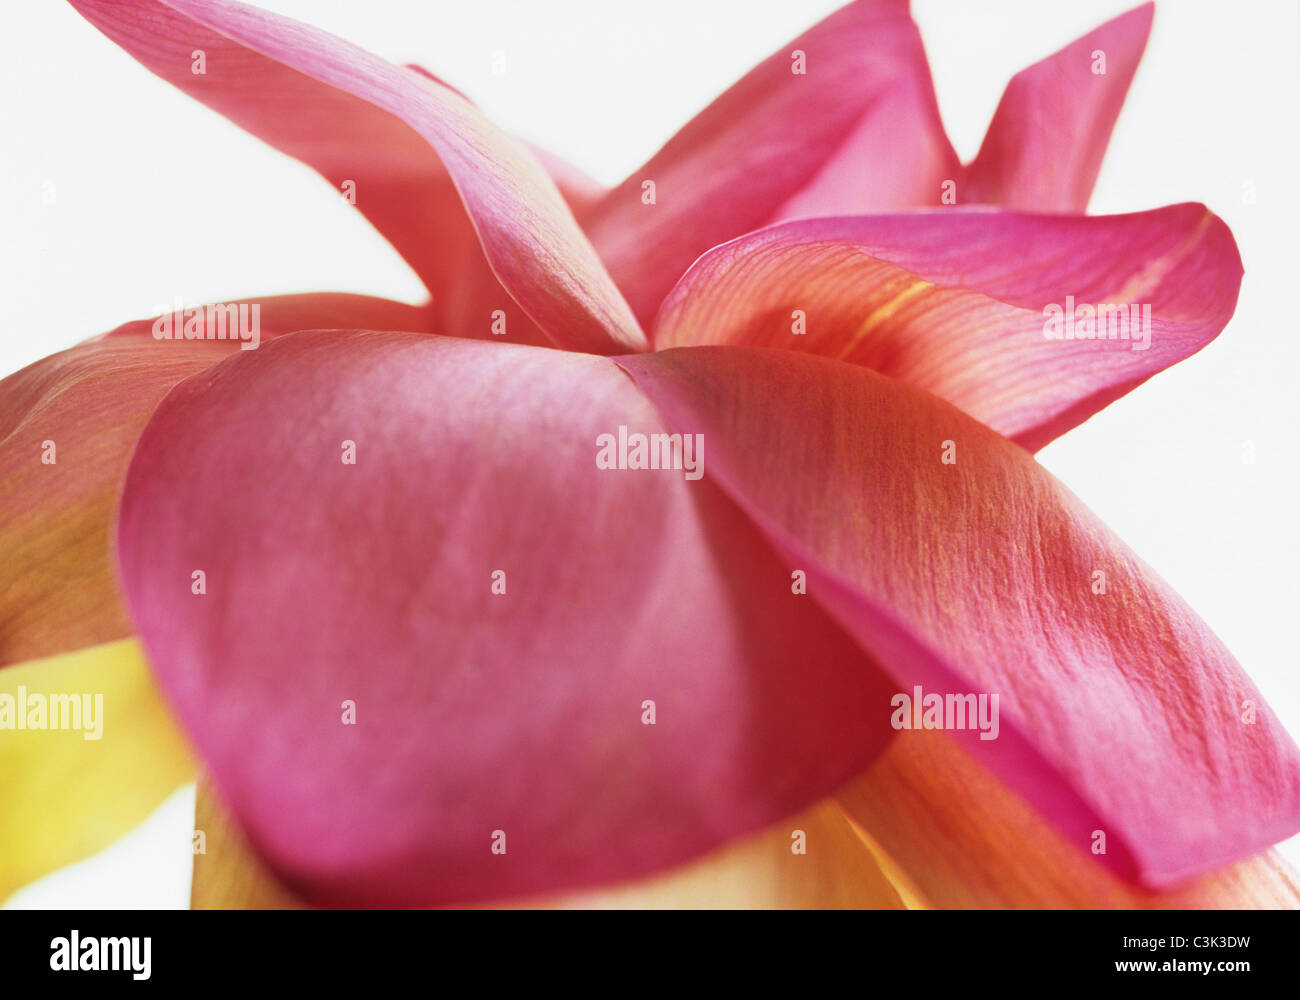 Pink flower against white background Stock Photo